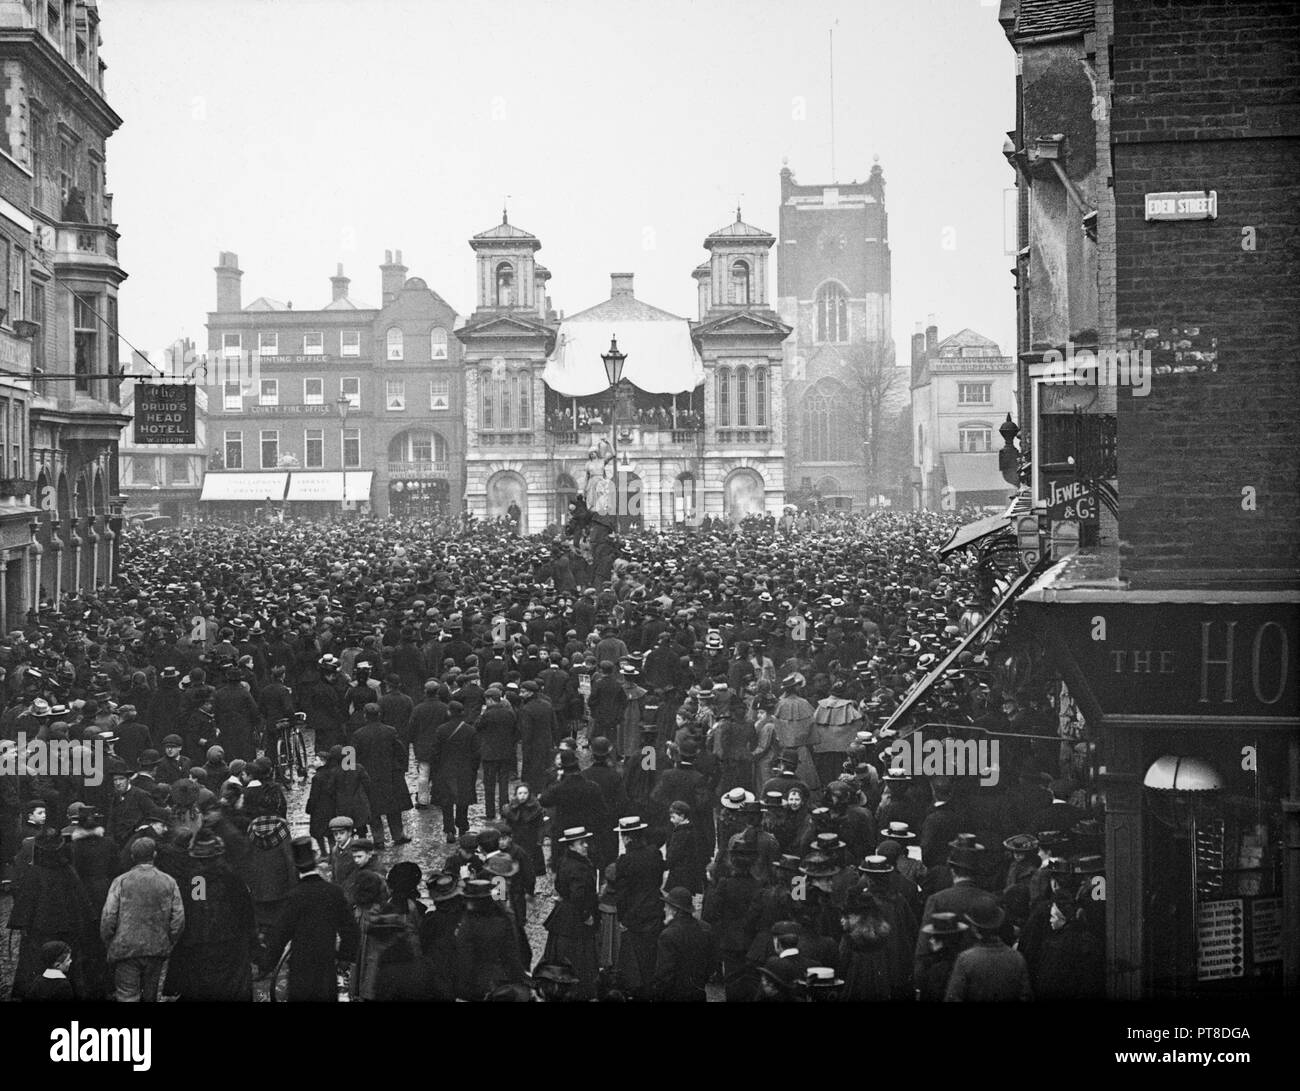 Kingston-Upon-Thames near London in 1901. Proclamation of King Edward VII in the town square before a large crowd. Stock Photo